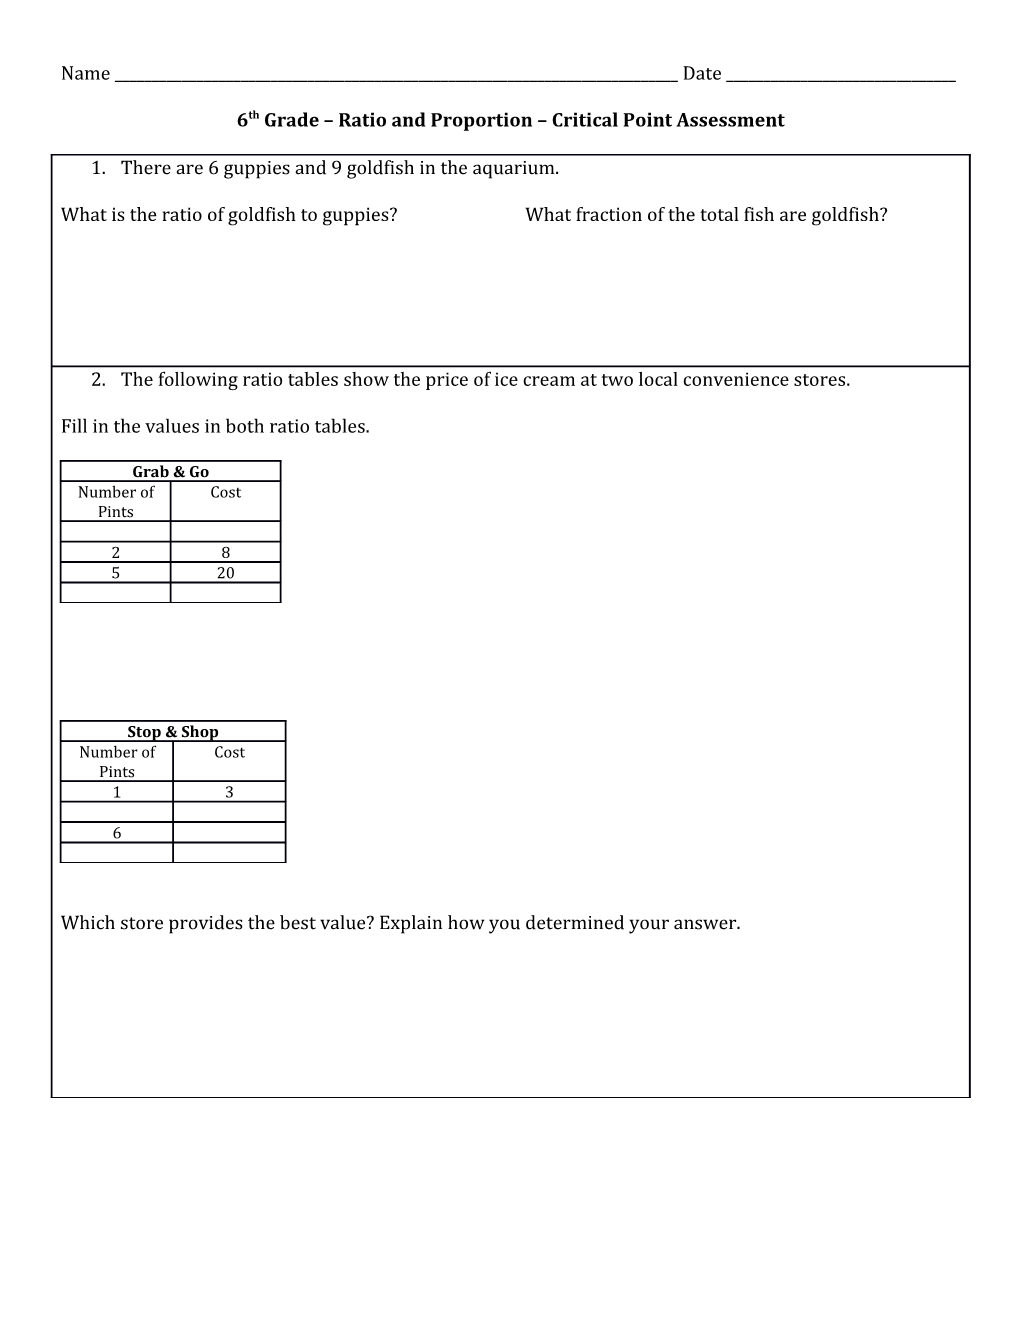 6Th Grade Ratio and Proportion Critical Point Assessment